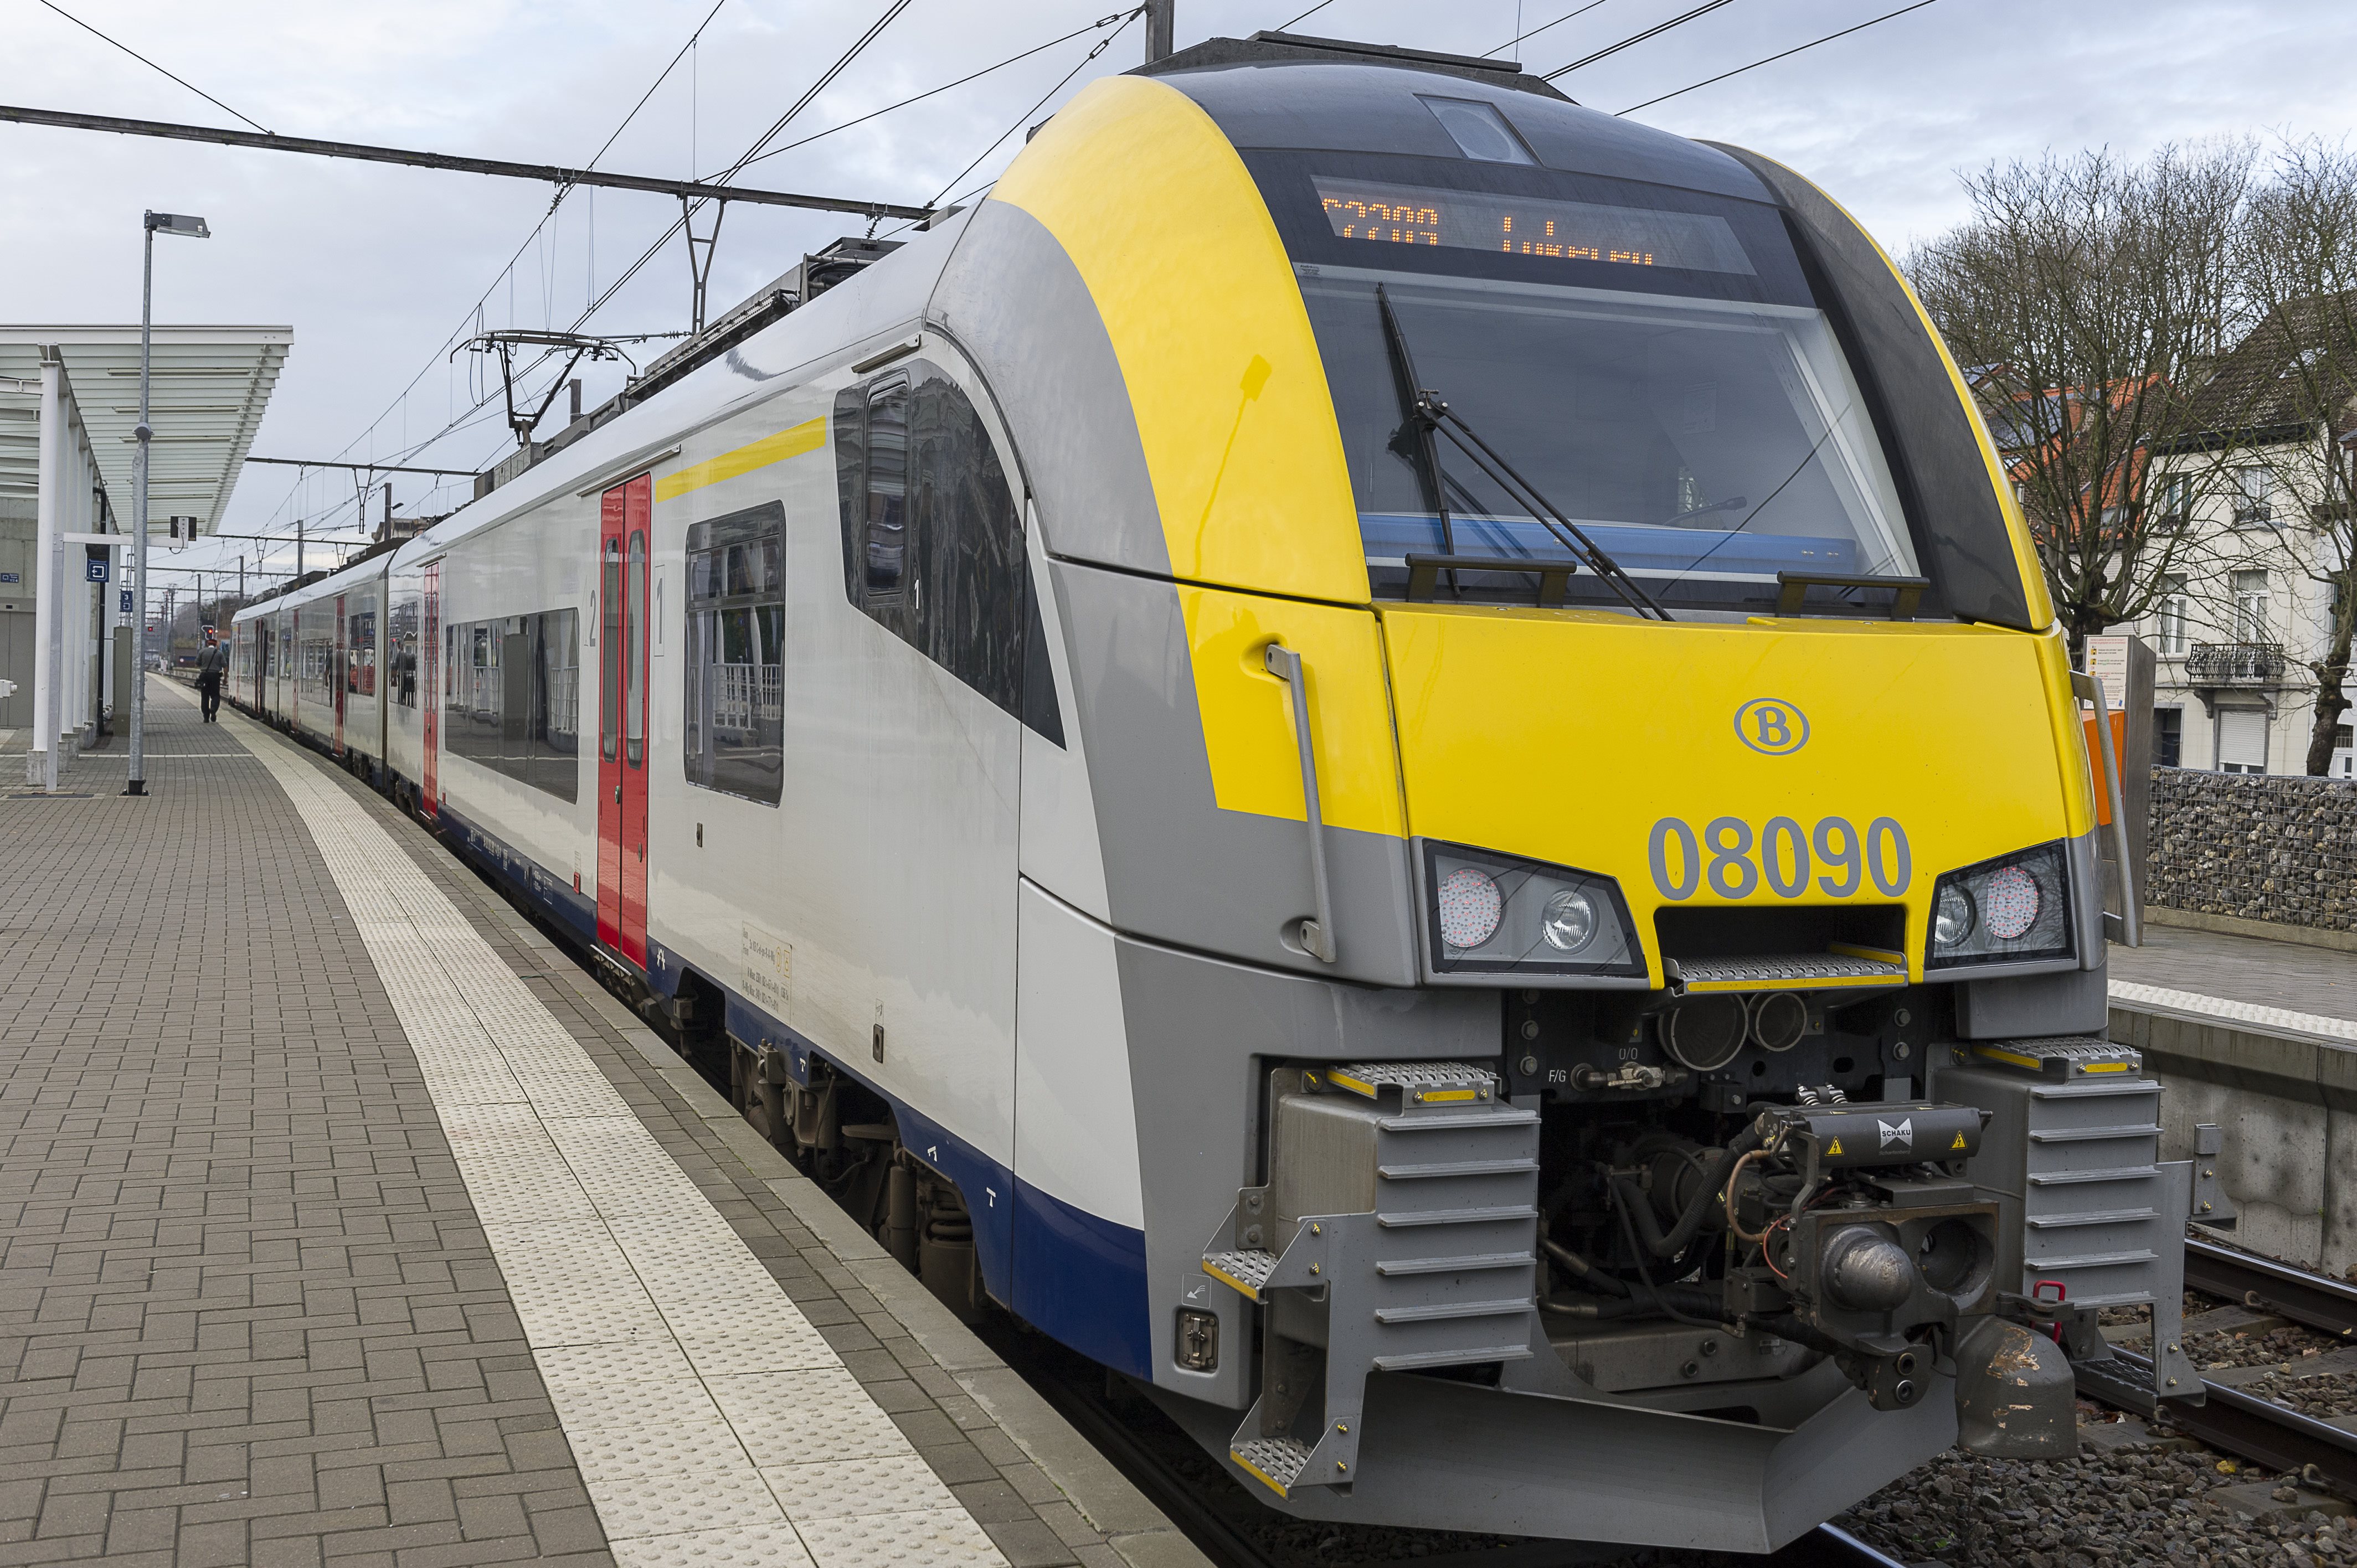 Belgian students to design warning system for train passengers